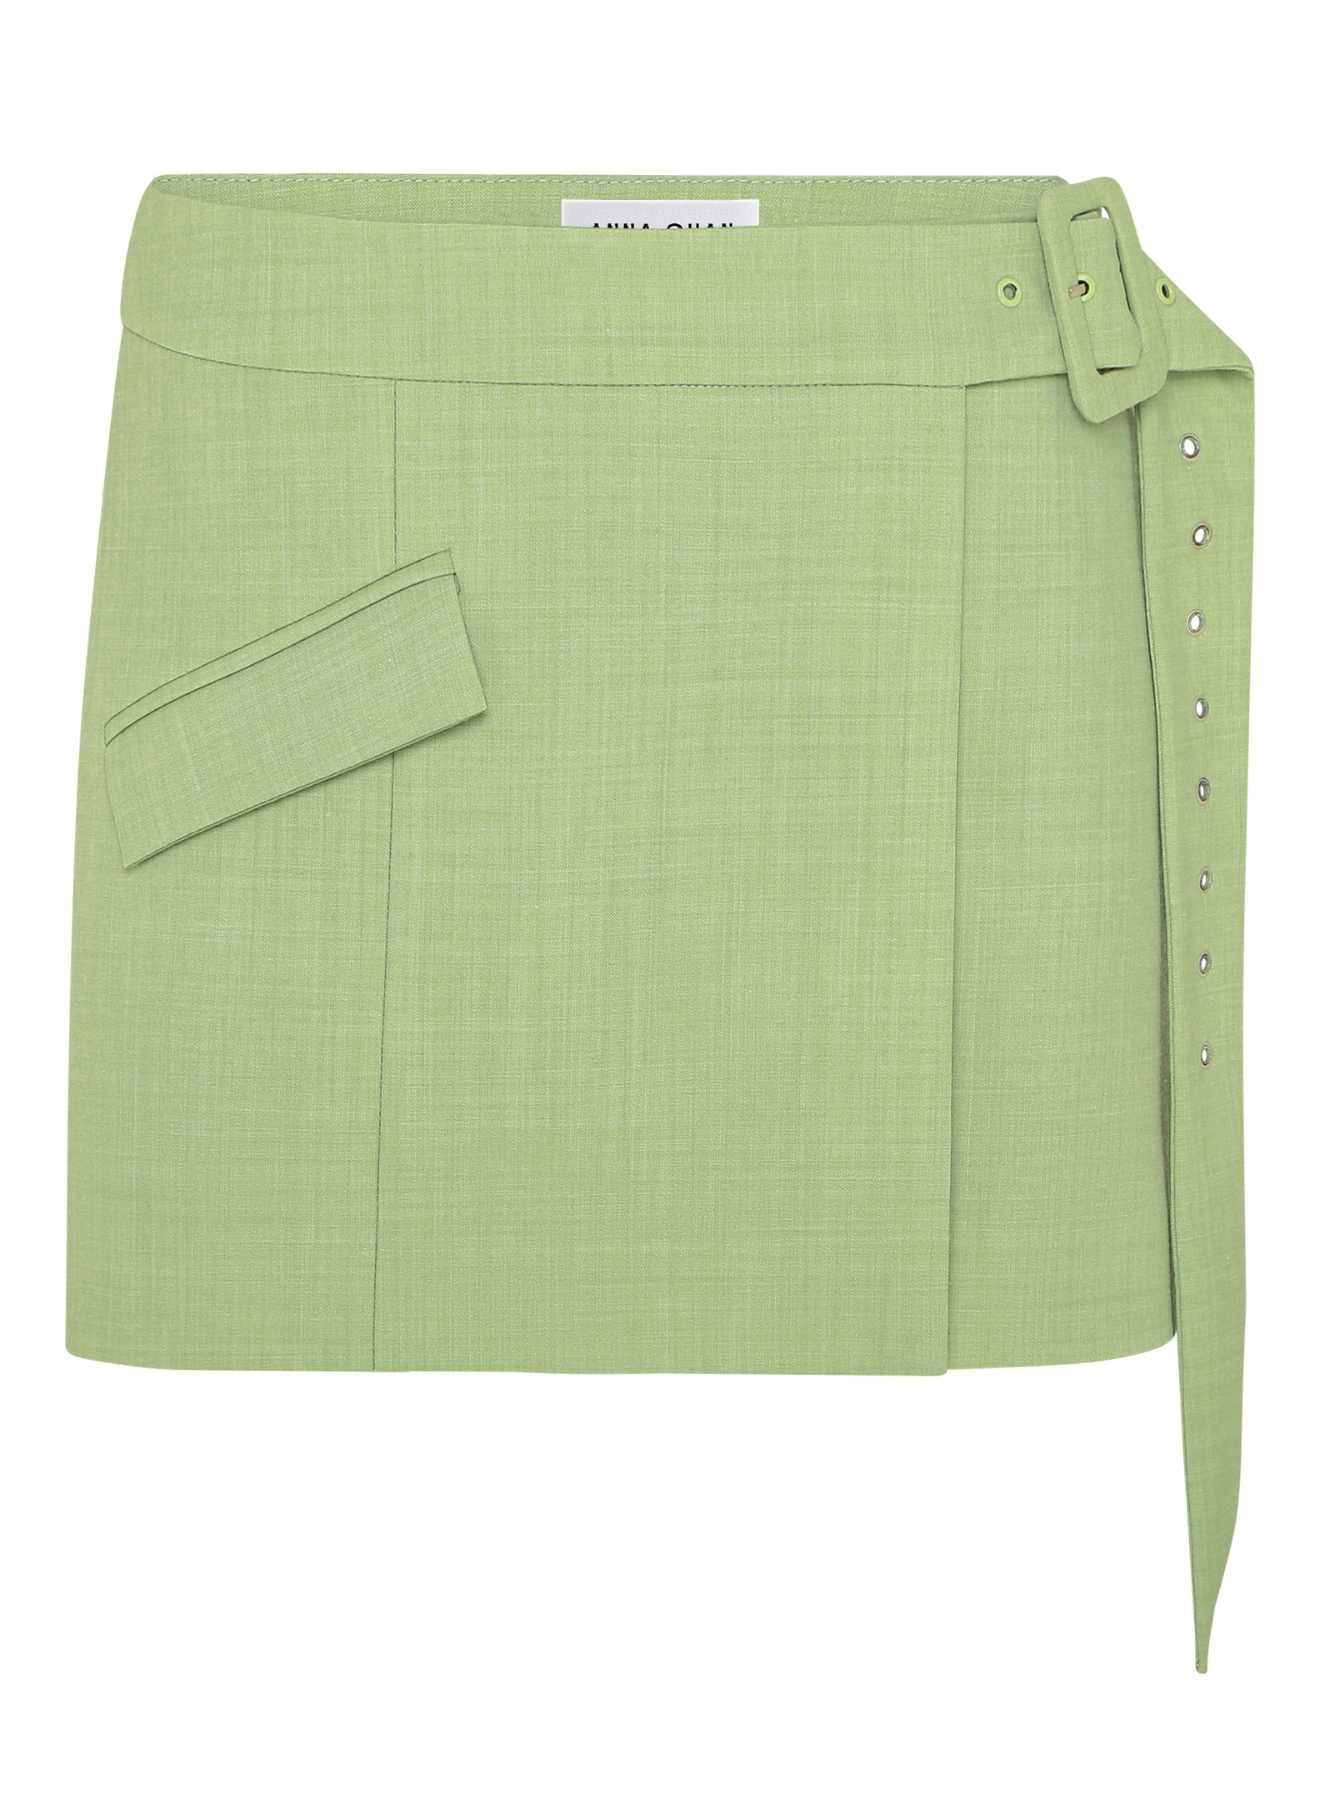 ANNA QUAN Pleat Wrap Mini Skirt. Designed for the fashion-forward, this skirt combines contemporary style with classic elegance. Embrace versatility with this wardrobe essential, perfect for both casual outings and dressed-up occasions. Mini-skirt, Micro mini-skirt, Work skirt, wool mini skirt, pleated short skirt, pleated mini skirt.